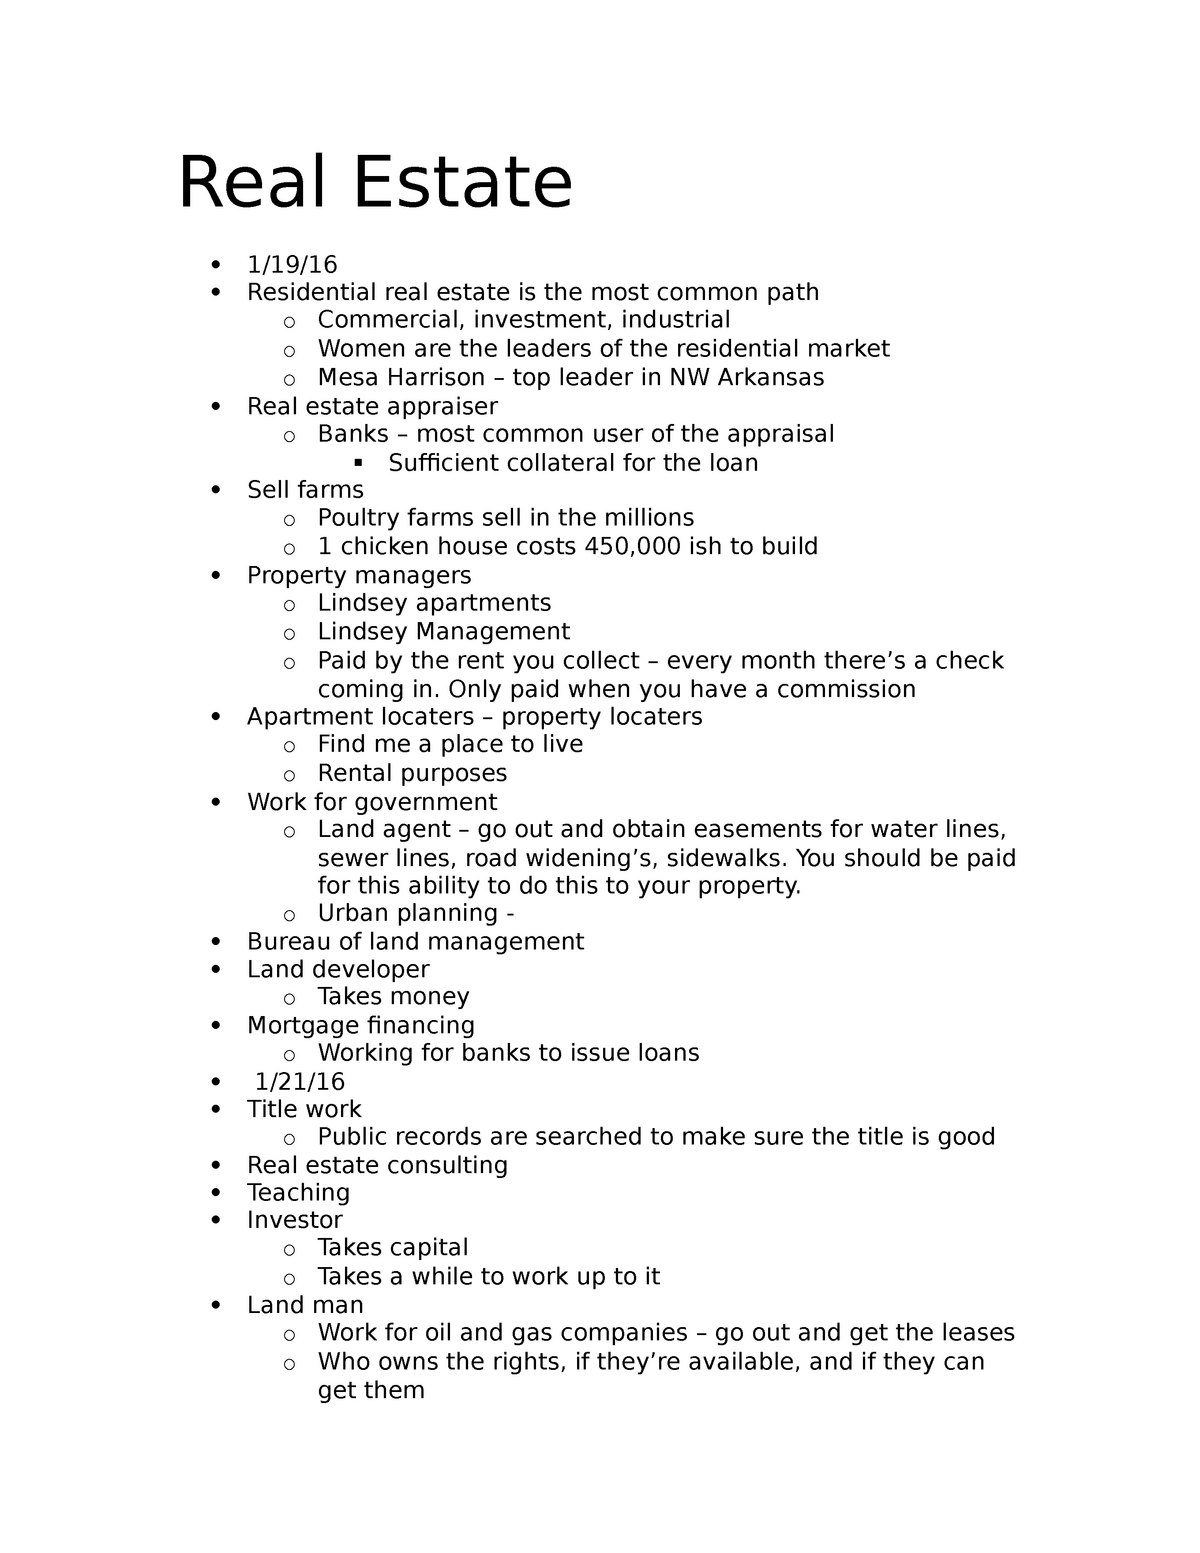 Real Estate study guide Real Estate Residential real estate is the